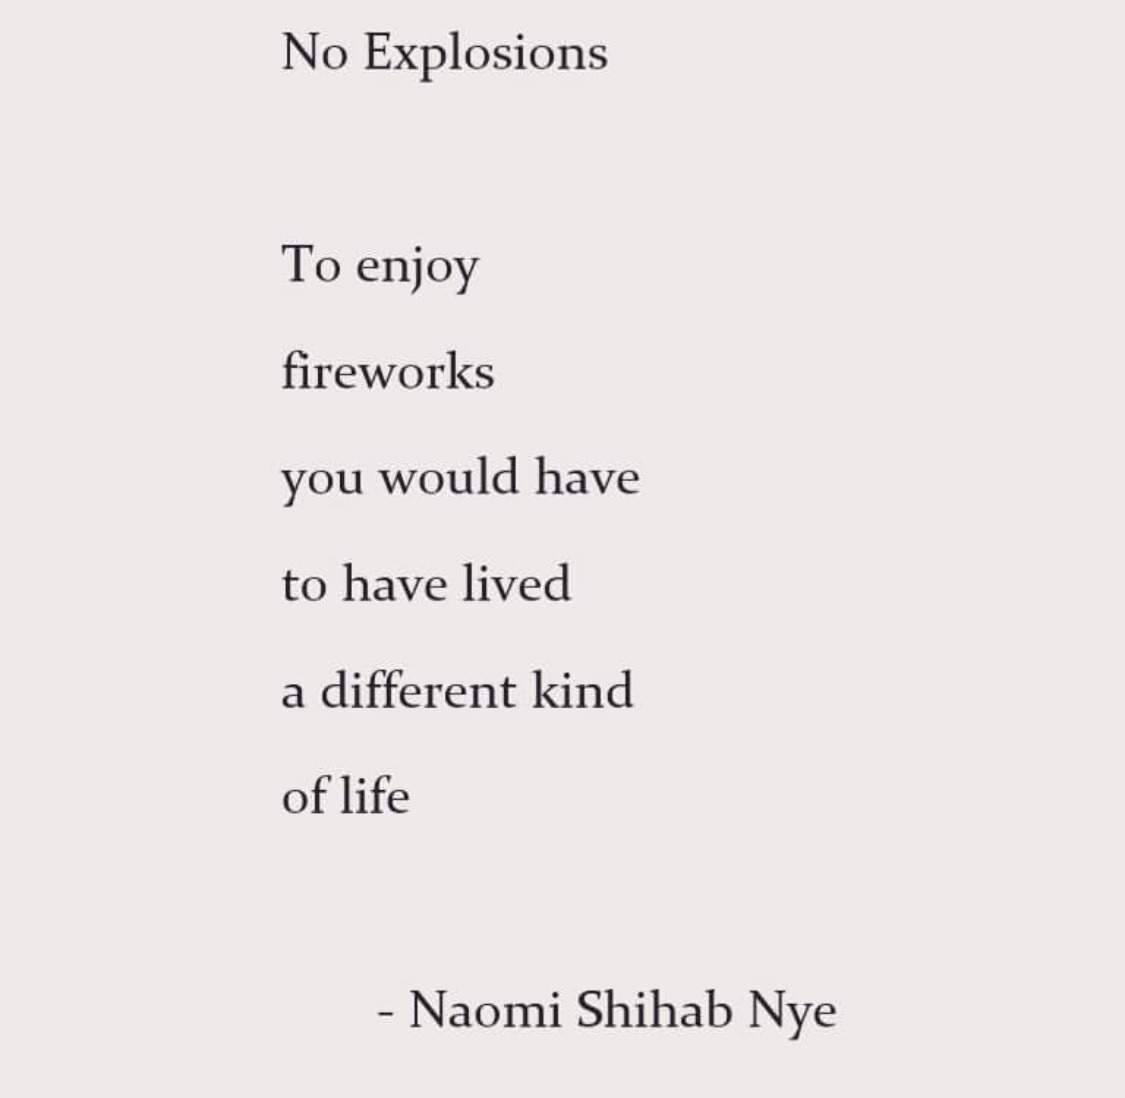 This was the exact thought in my mind listening to the fireworks tonight. I open the newspaper and there it is on the page. This poem has been doing the rounds again: